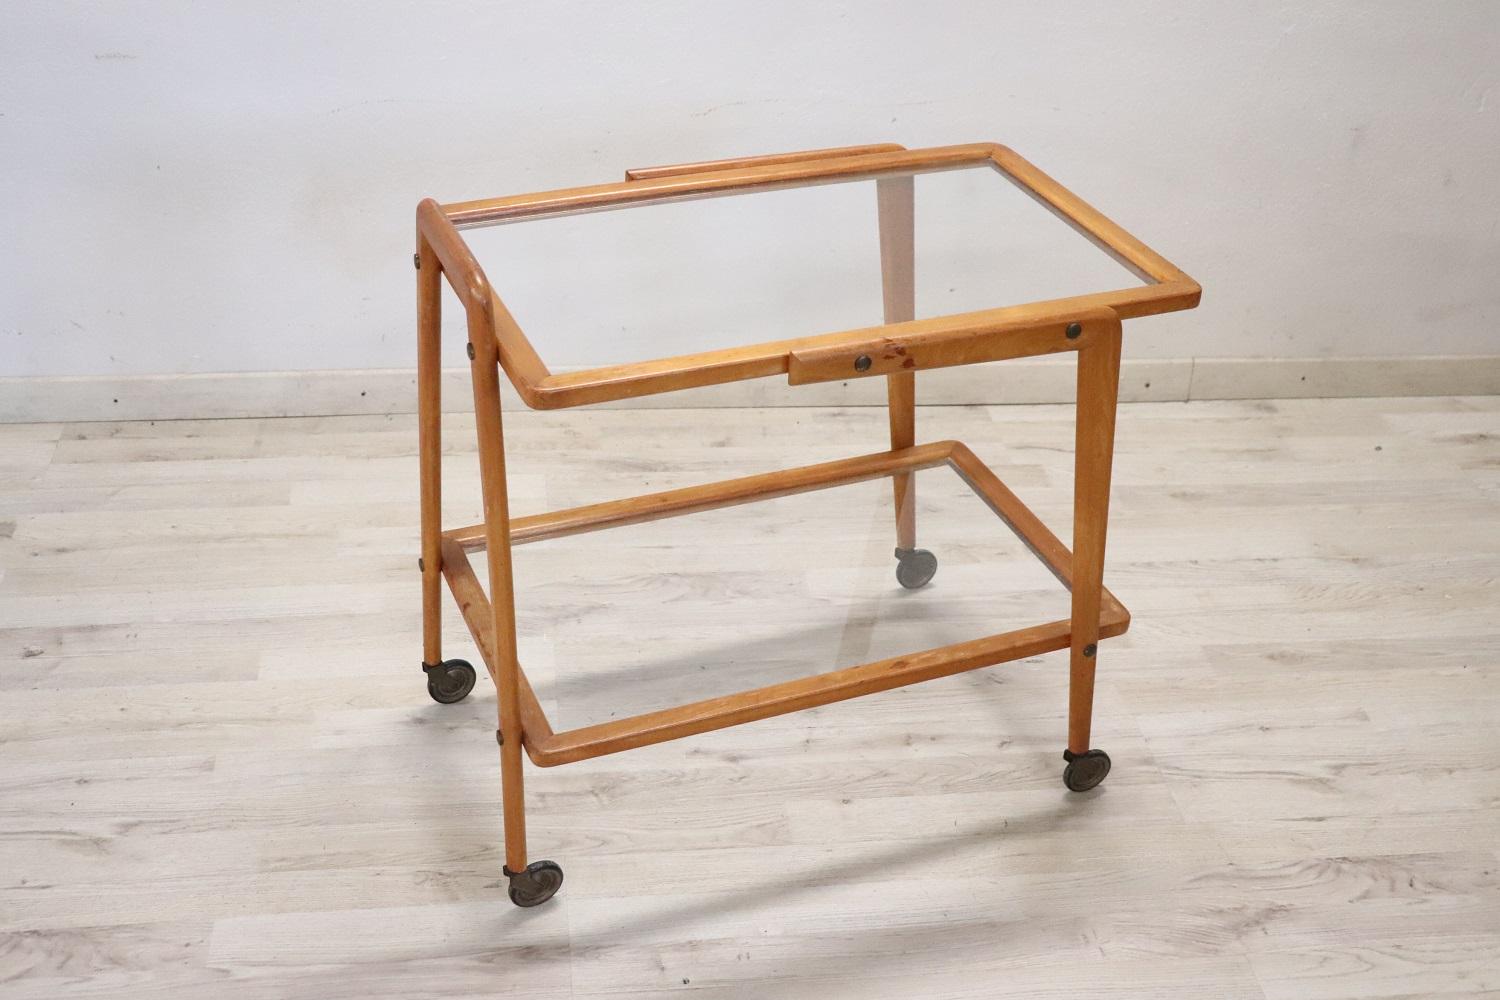 Rare 1950s Italian desgin serving bar cart. Made of beech wood equipped with two glass shelves and brass wheels for convenient movement. Perfect for serving drinks to your guests. Vintage good conditions.